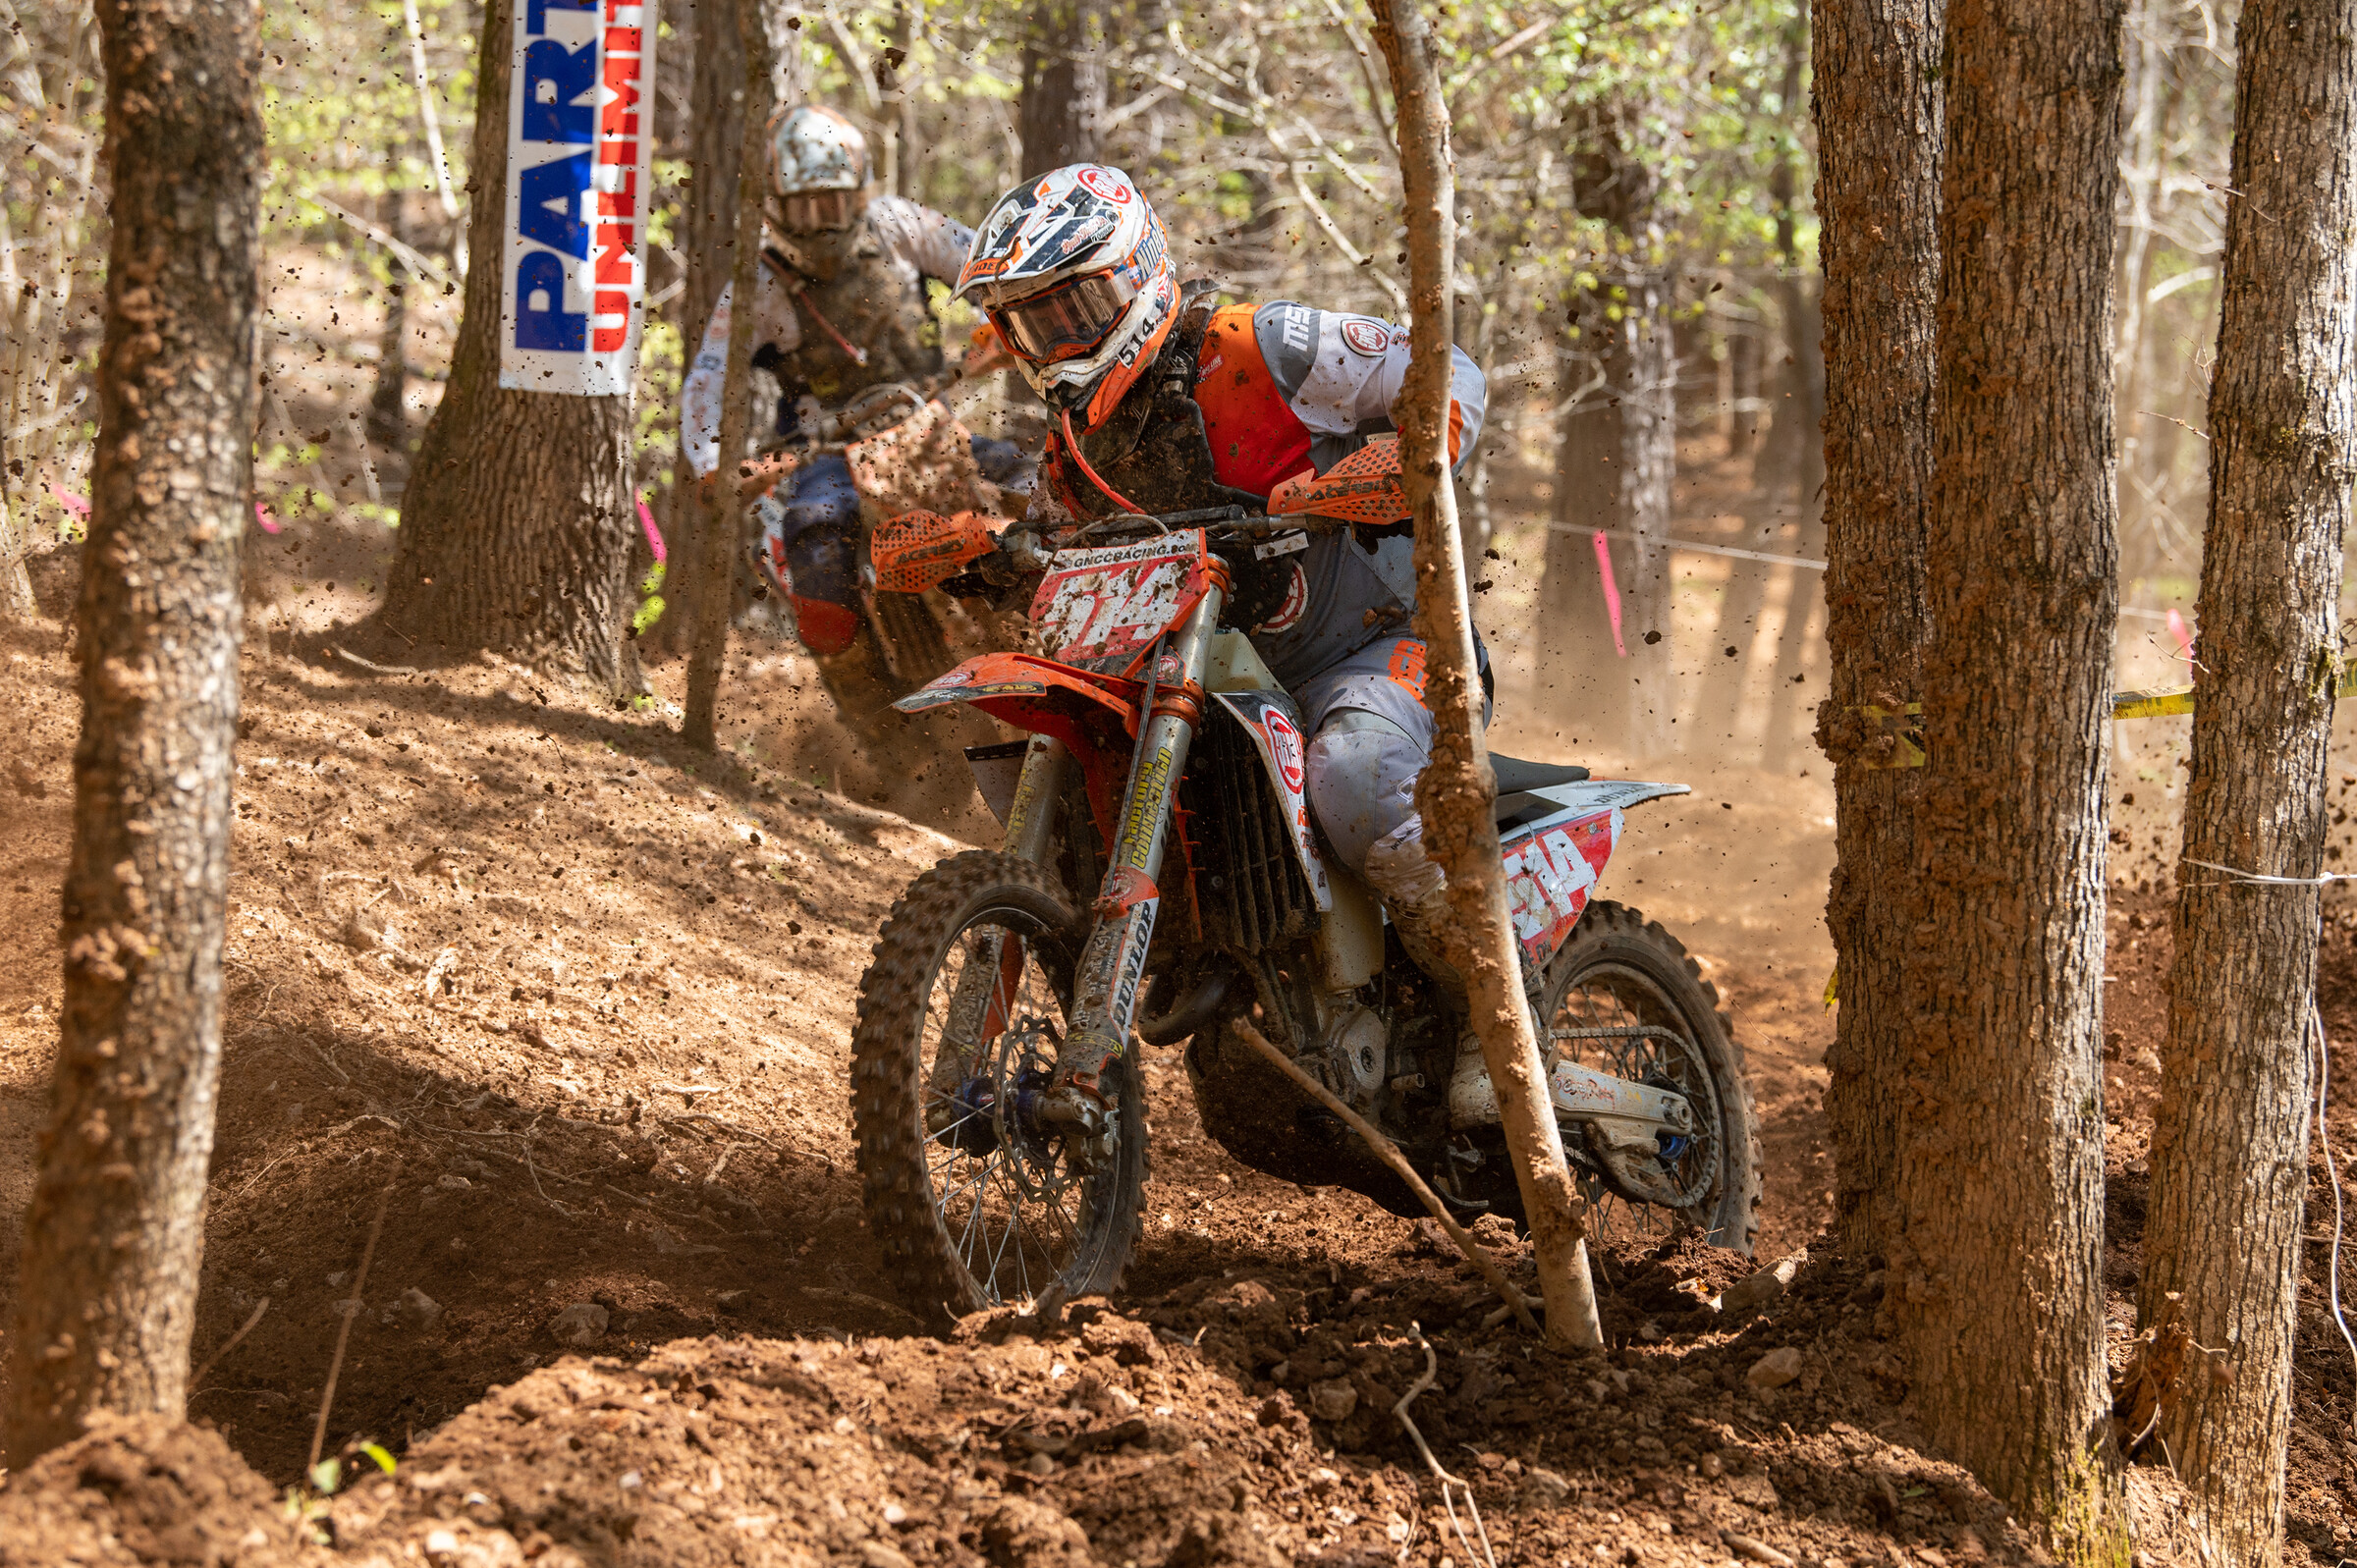 Steward Baylor (Rocky Mountain/Tely Energy KTM Racing) battled back to earn second overall and extend his points lead.